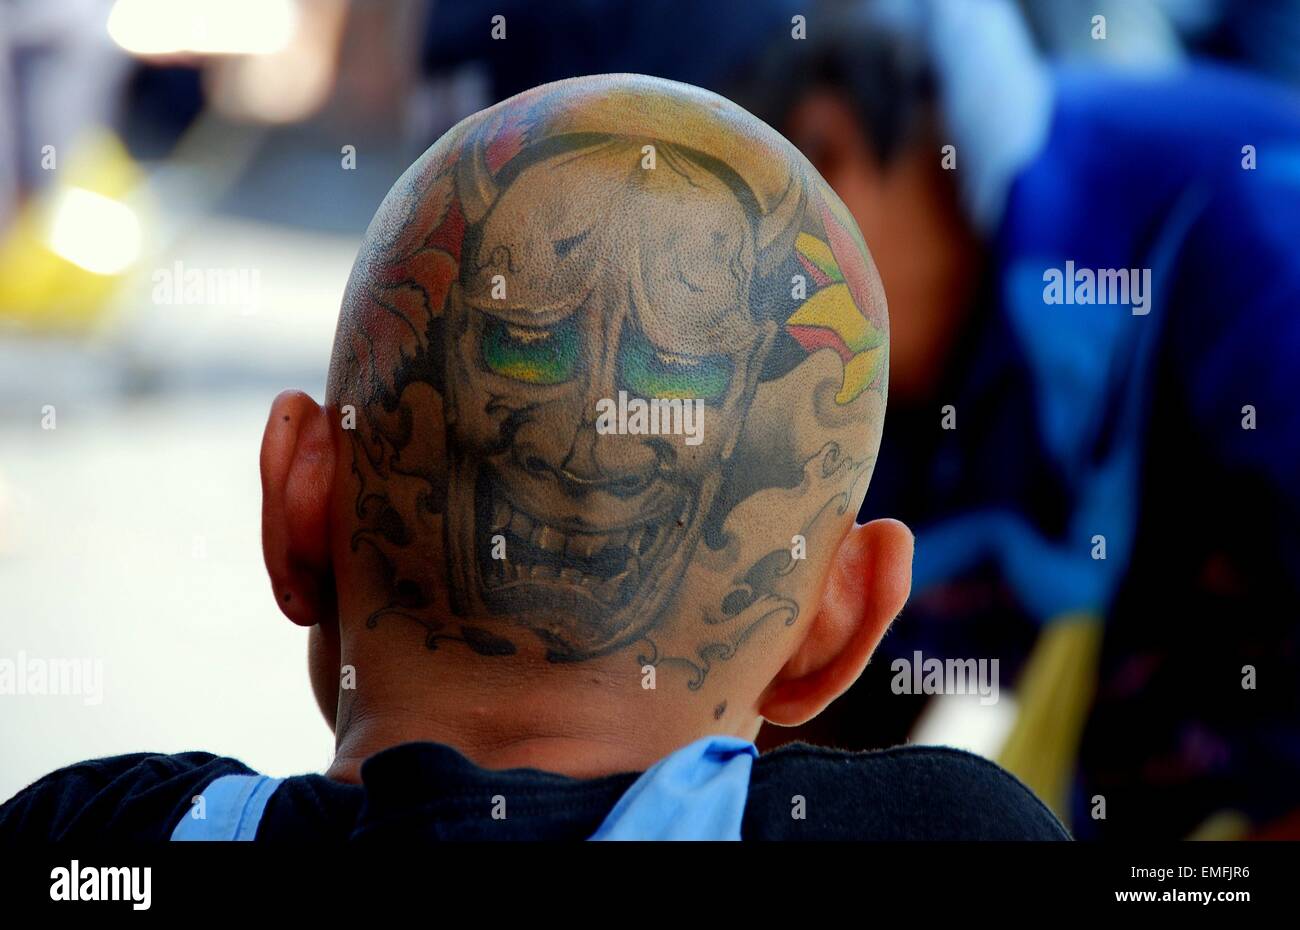 Bangkok, Thailand:   Thai youth with shaved head covered in tattoos at the Chatuchak weekend market  * Stock Photo